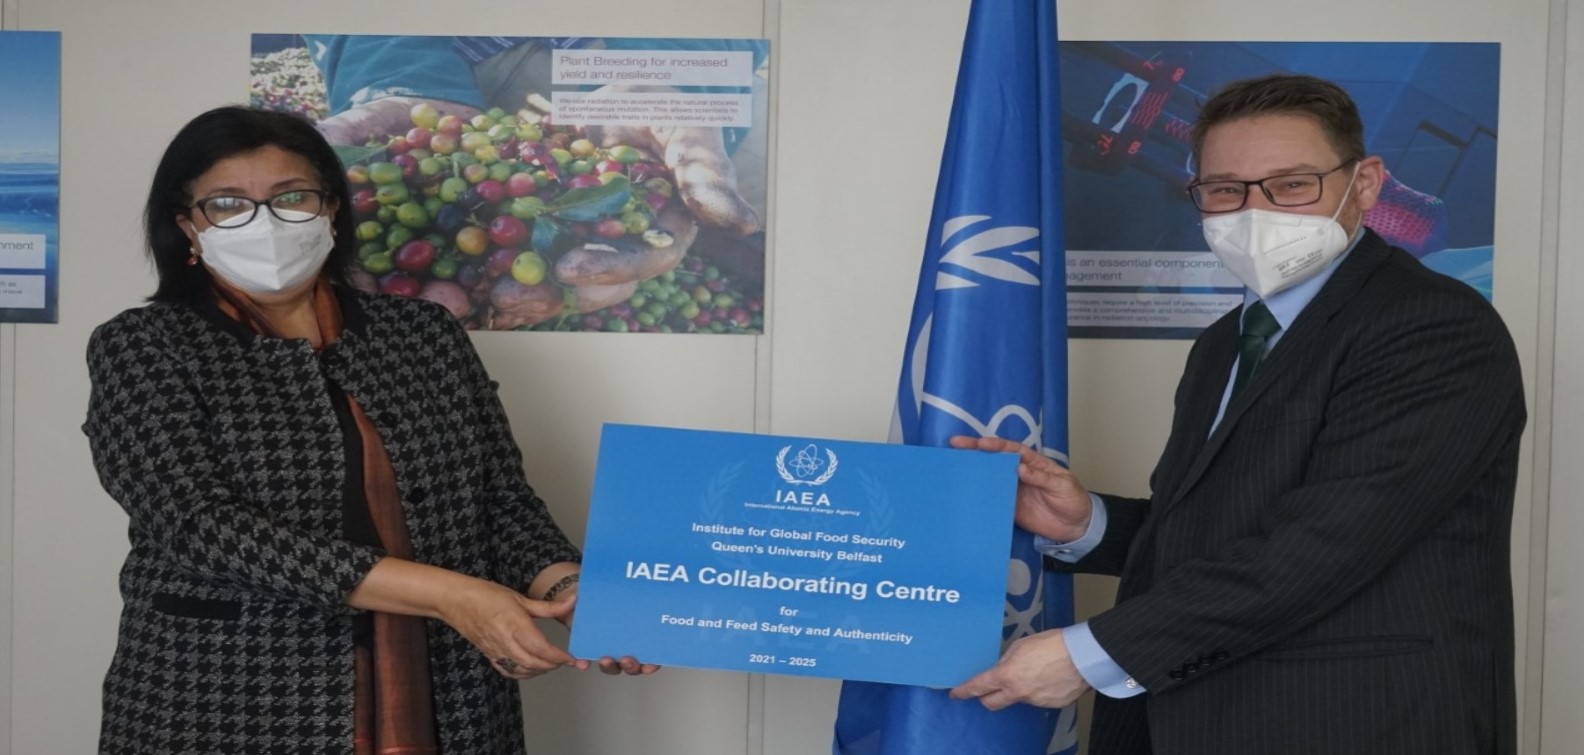 Najat Mokhtar hands plaque over to William Gatward